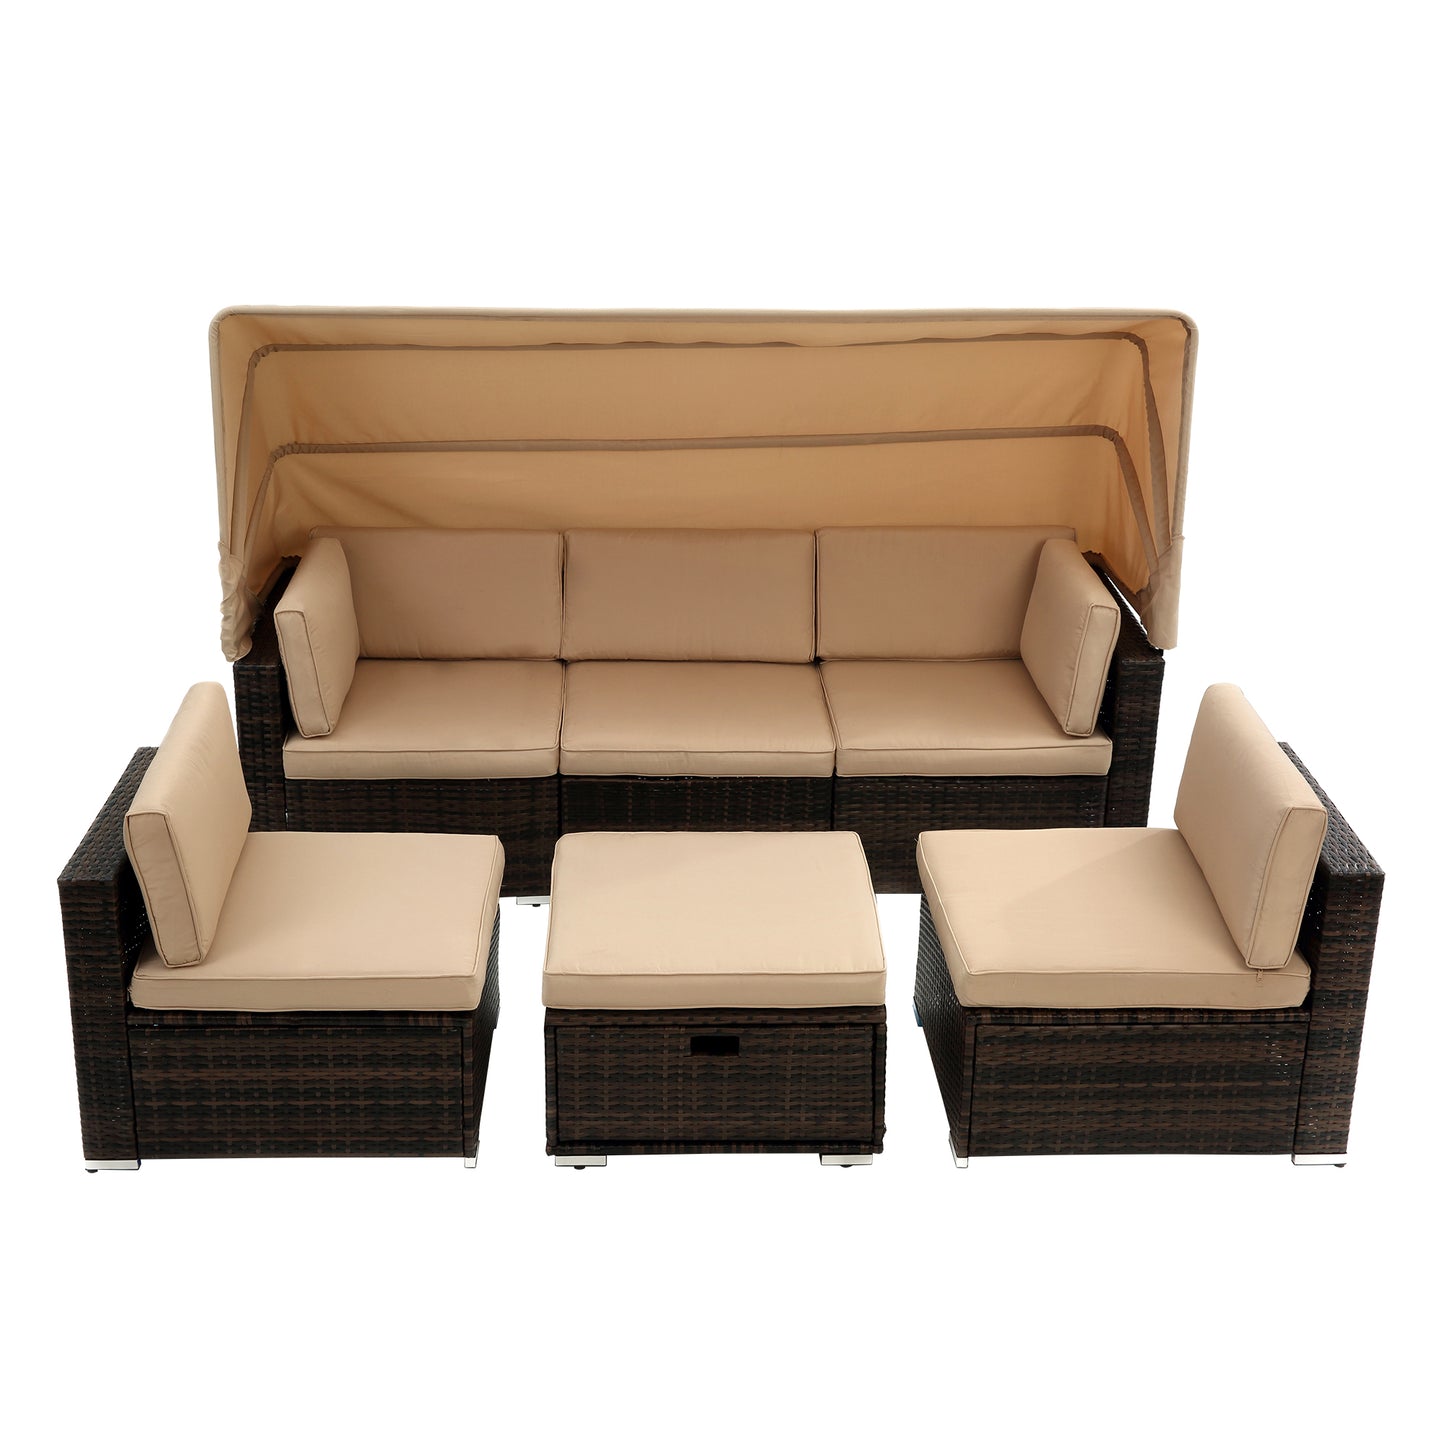 Modern outdoor sunbathing rattan sofa wholesale steel pool furniture chaise metal outdoor chair modular sectional sofa sets with roof